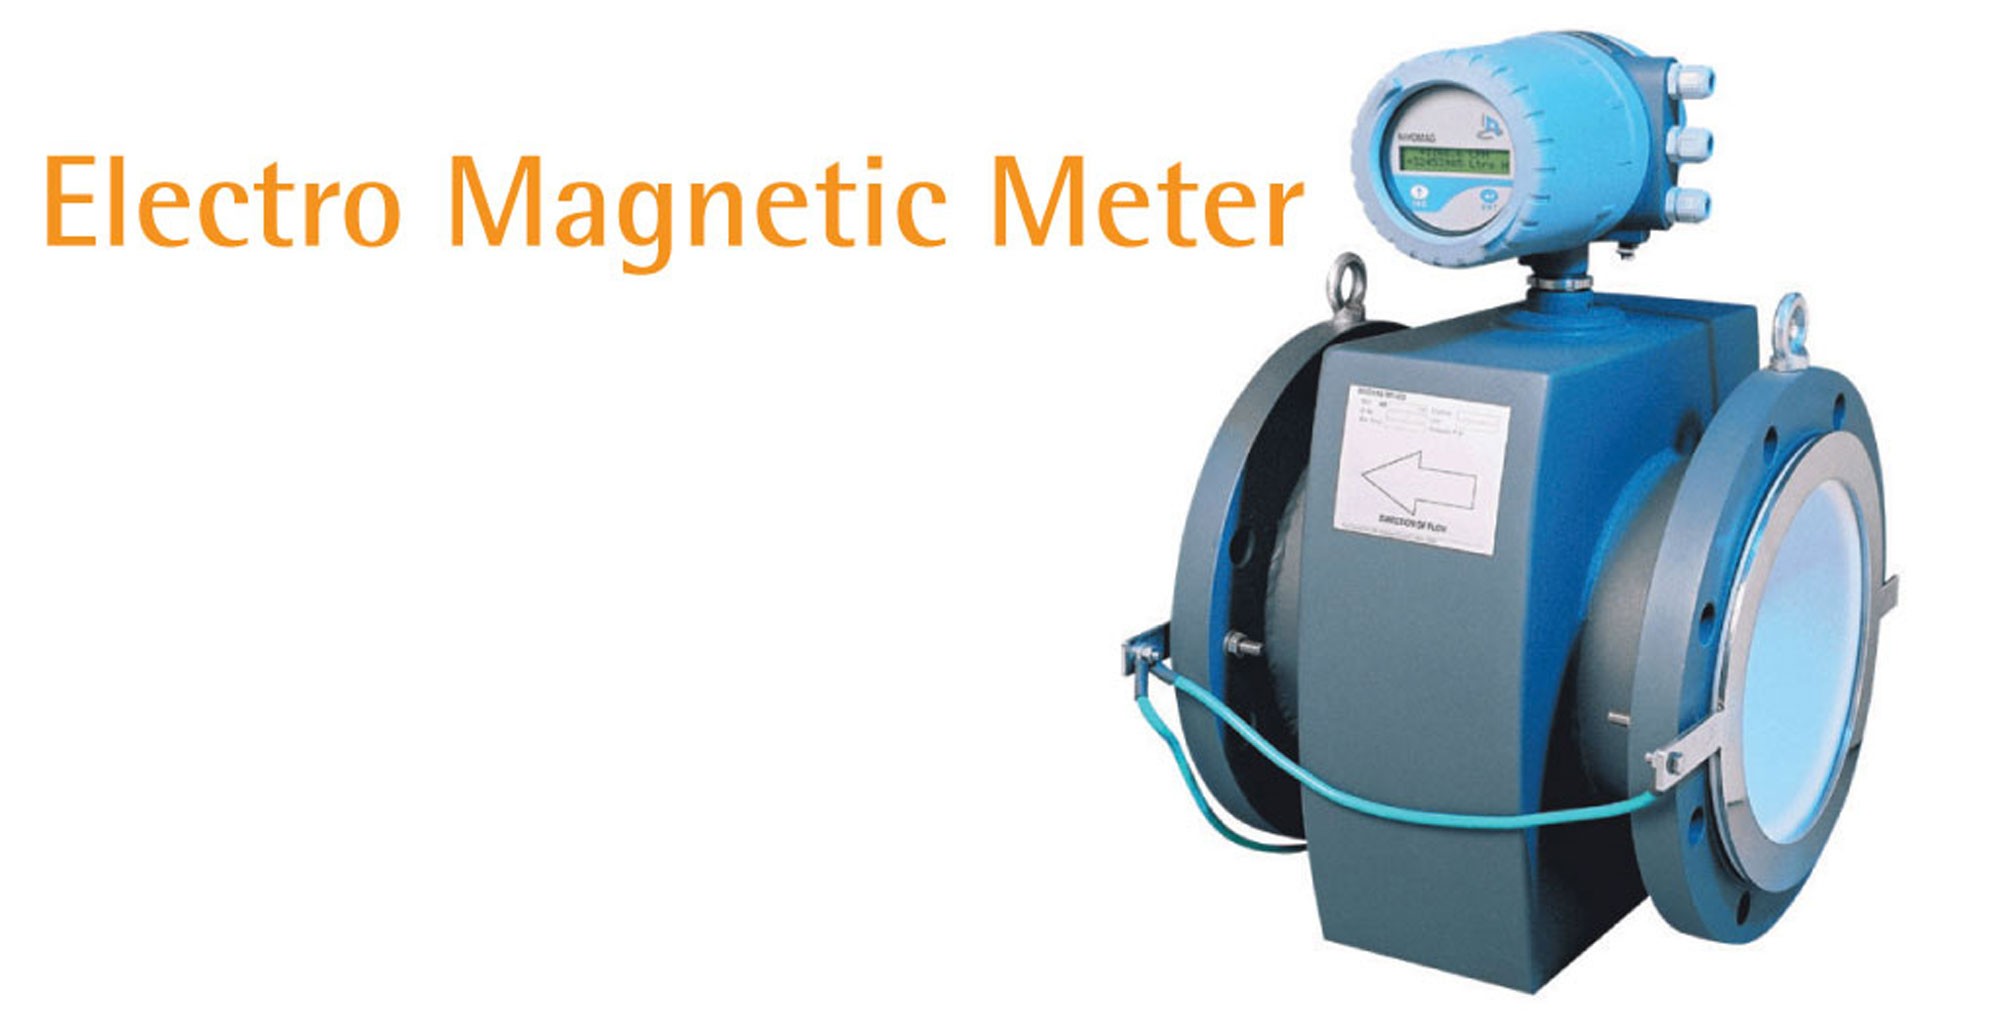 Electro Magnetic Meter